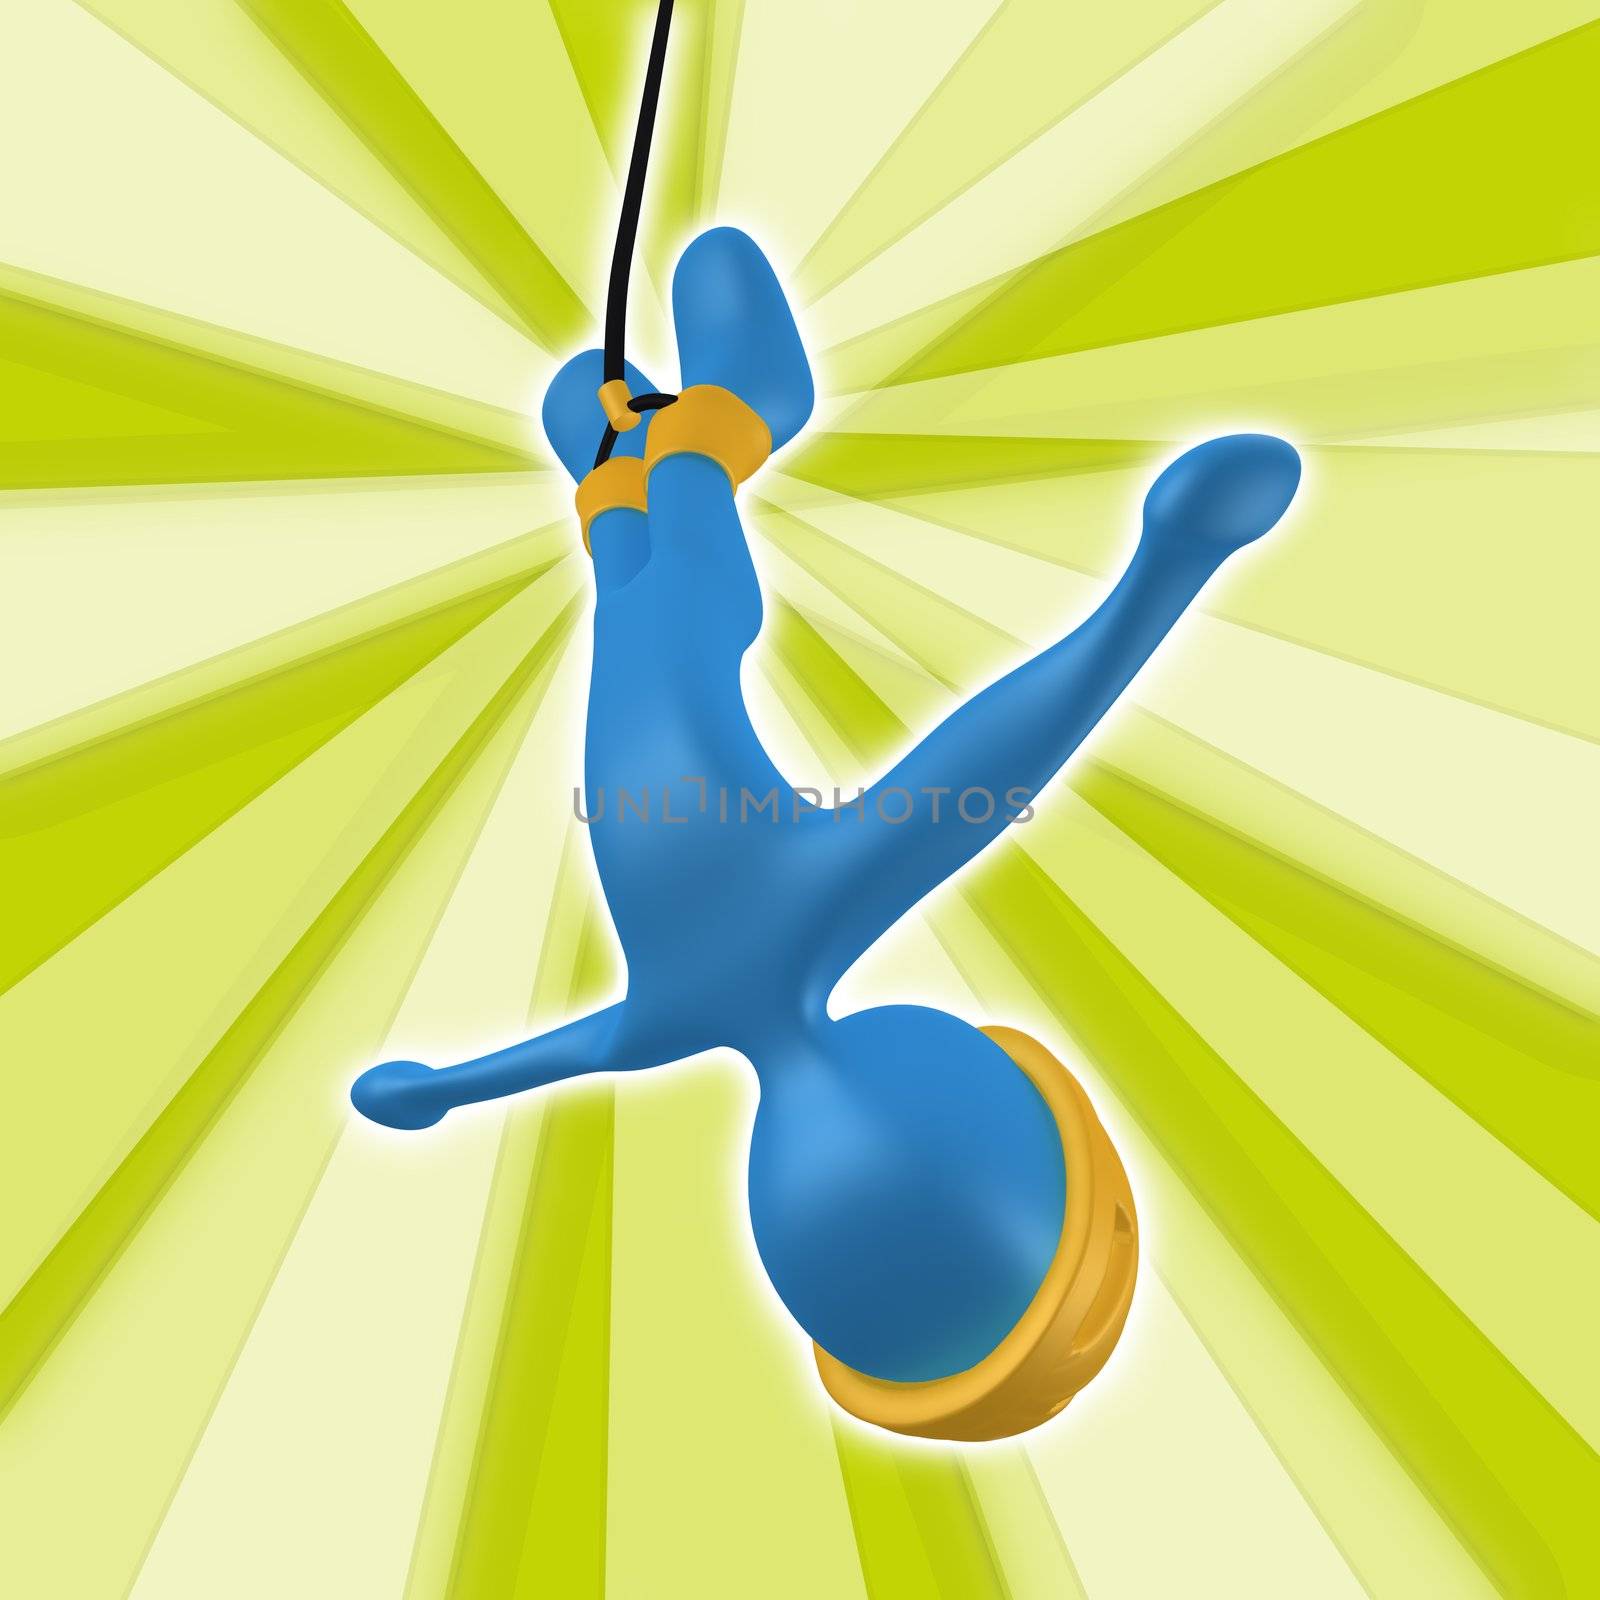 Computer generated image - Bungee Jumping .